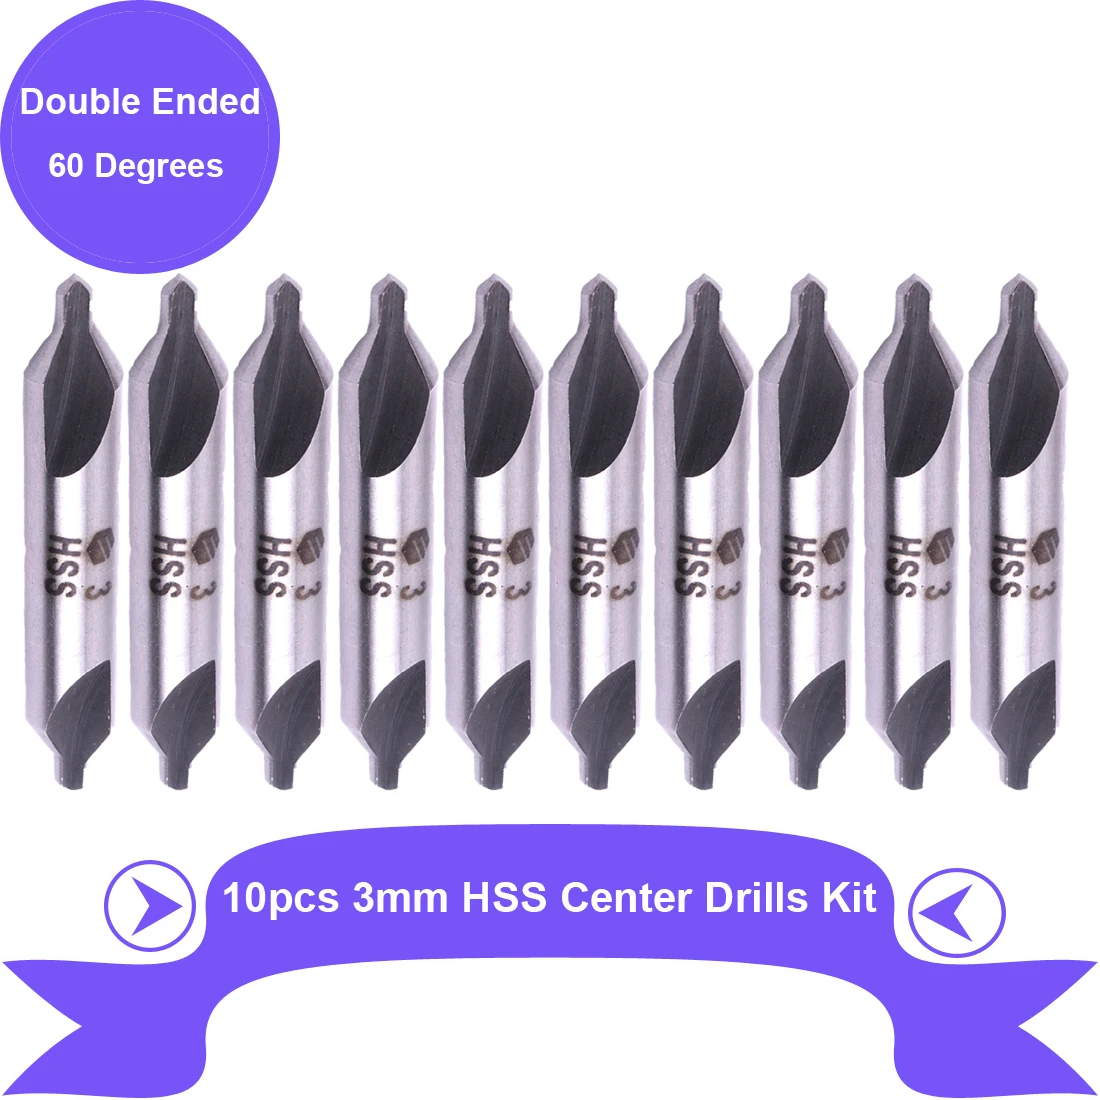 10pcs 3mm High Speed Steel Center Drill Bits Set A-Type 60 Degree Double Ended Combined Countersink Drill Kit Metal Drill Bit